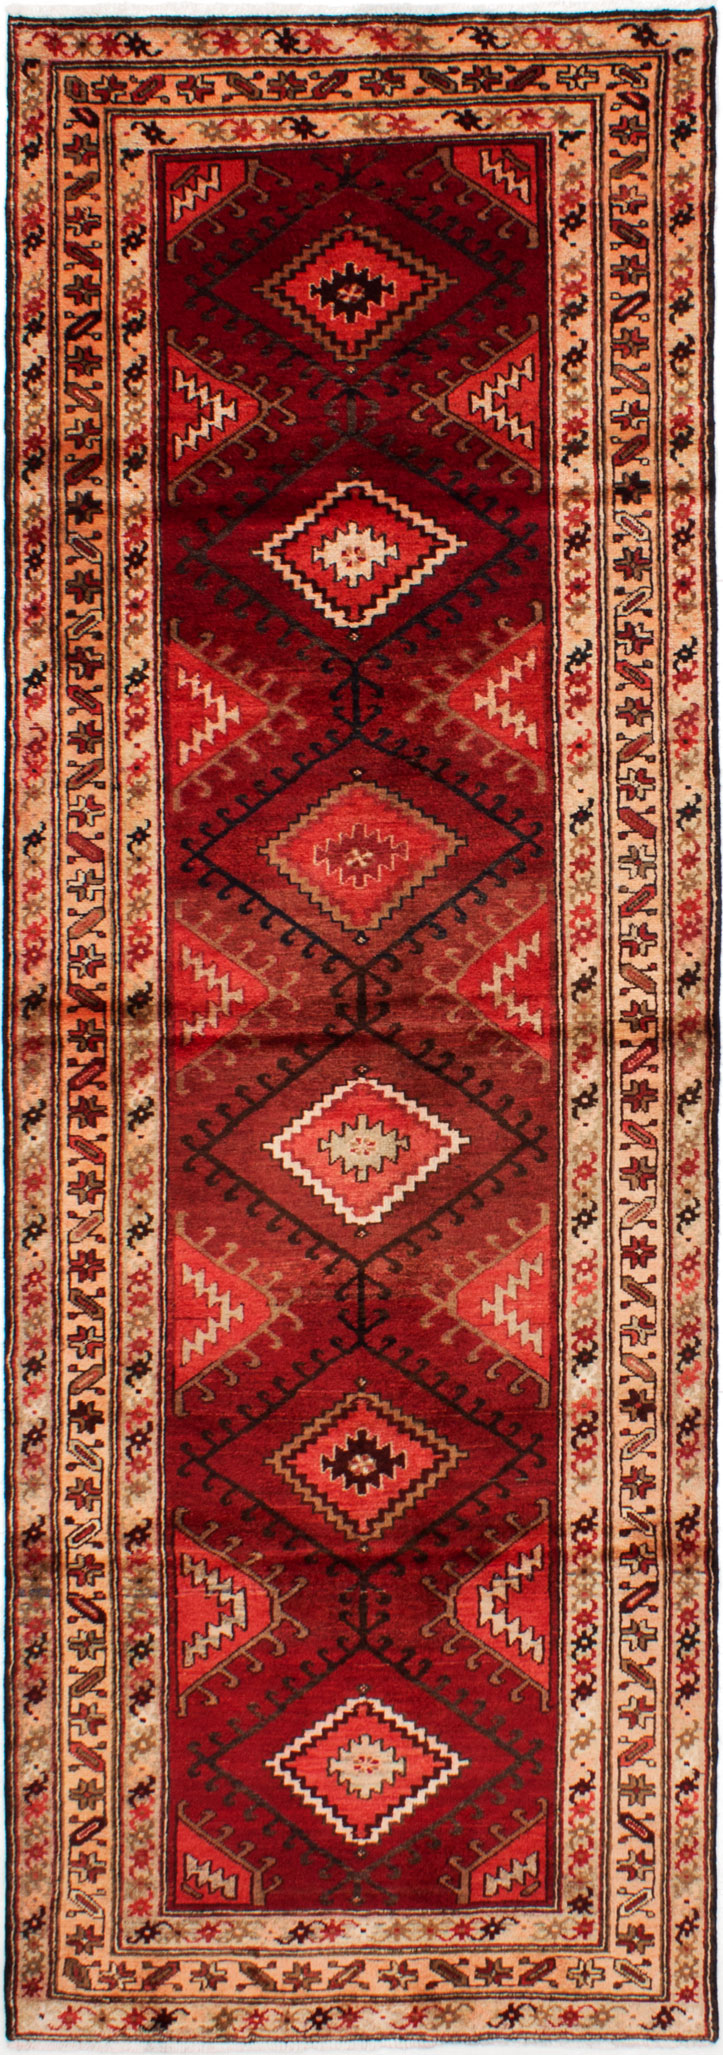 Hand-knotted Hamadan Red Wool Rug 3'6" x 10'3"  Size: 3'6" x 10'3"  